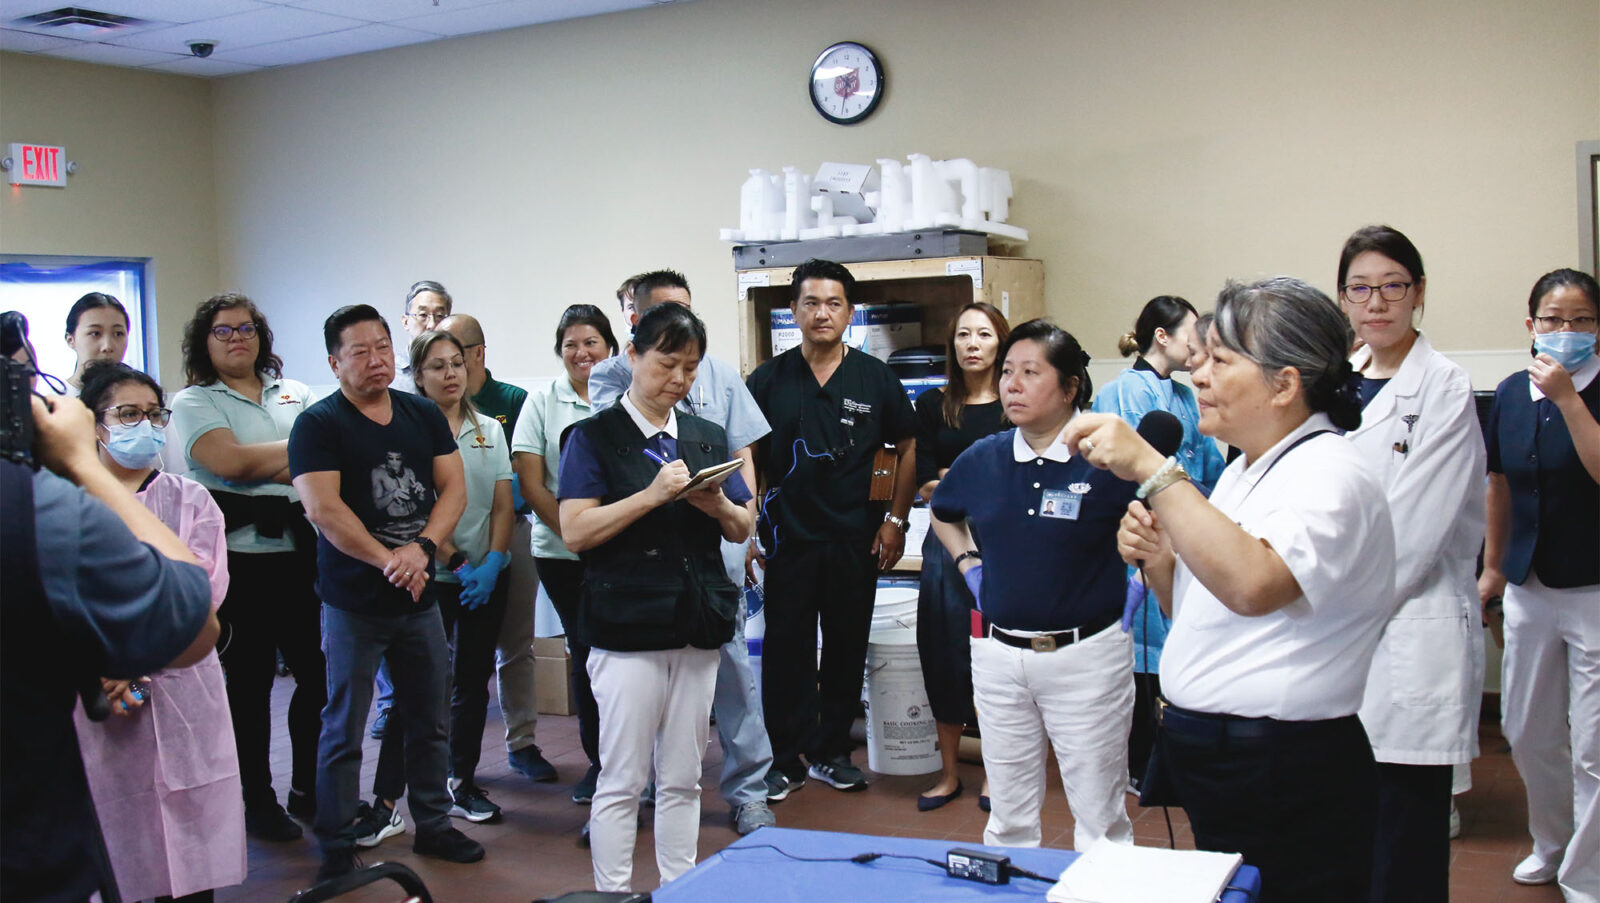 Audrey (recorder, center left) reports on the current situation of Tzu Chi Dental Clinic in Las Vegas at the Salvation Army Activity Center